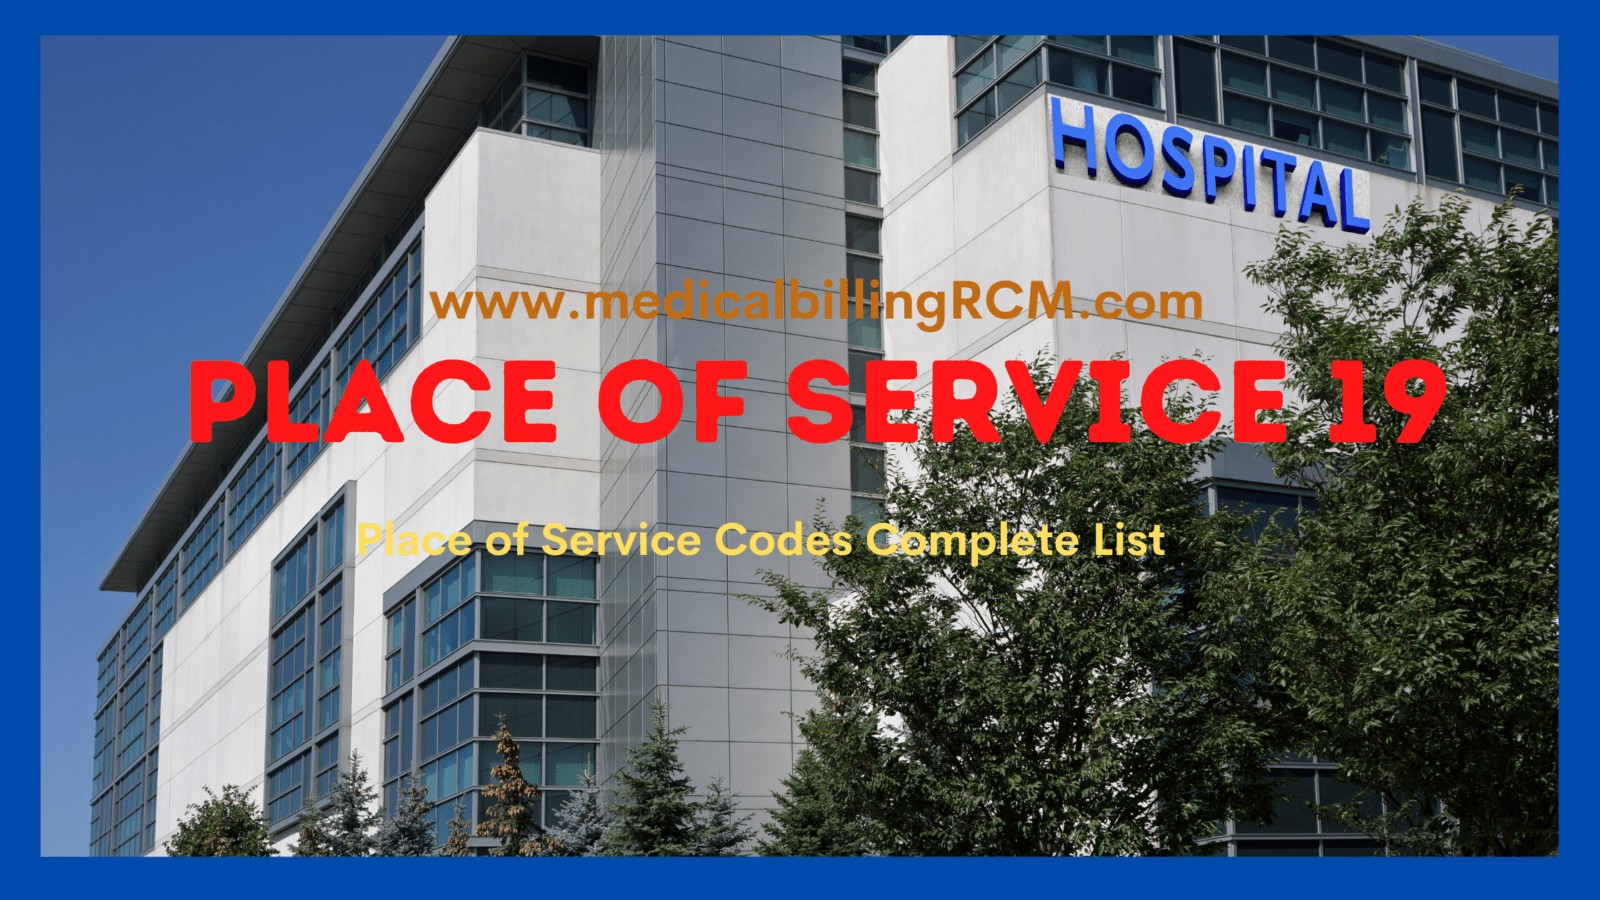 place of service 19 in medical billing